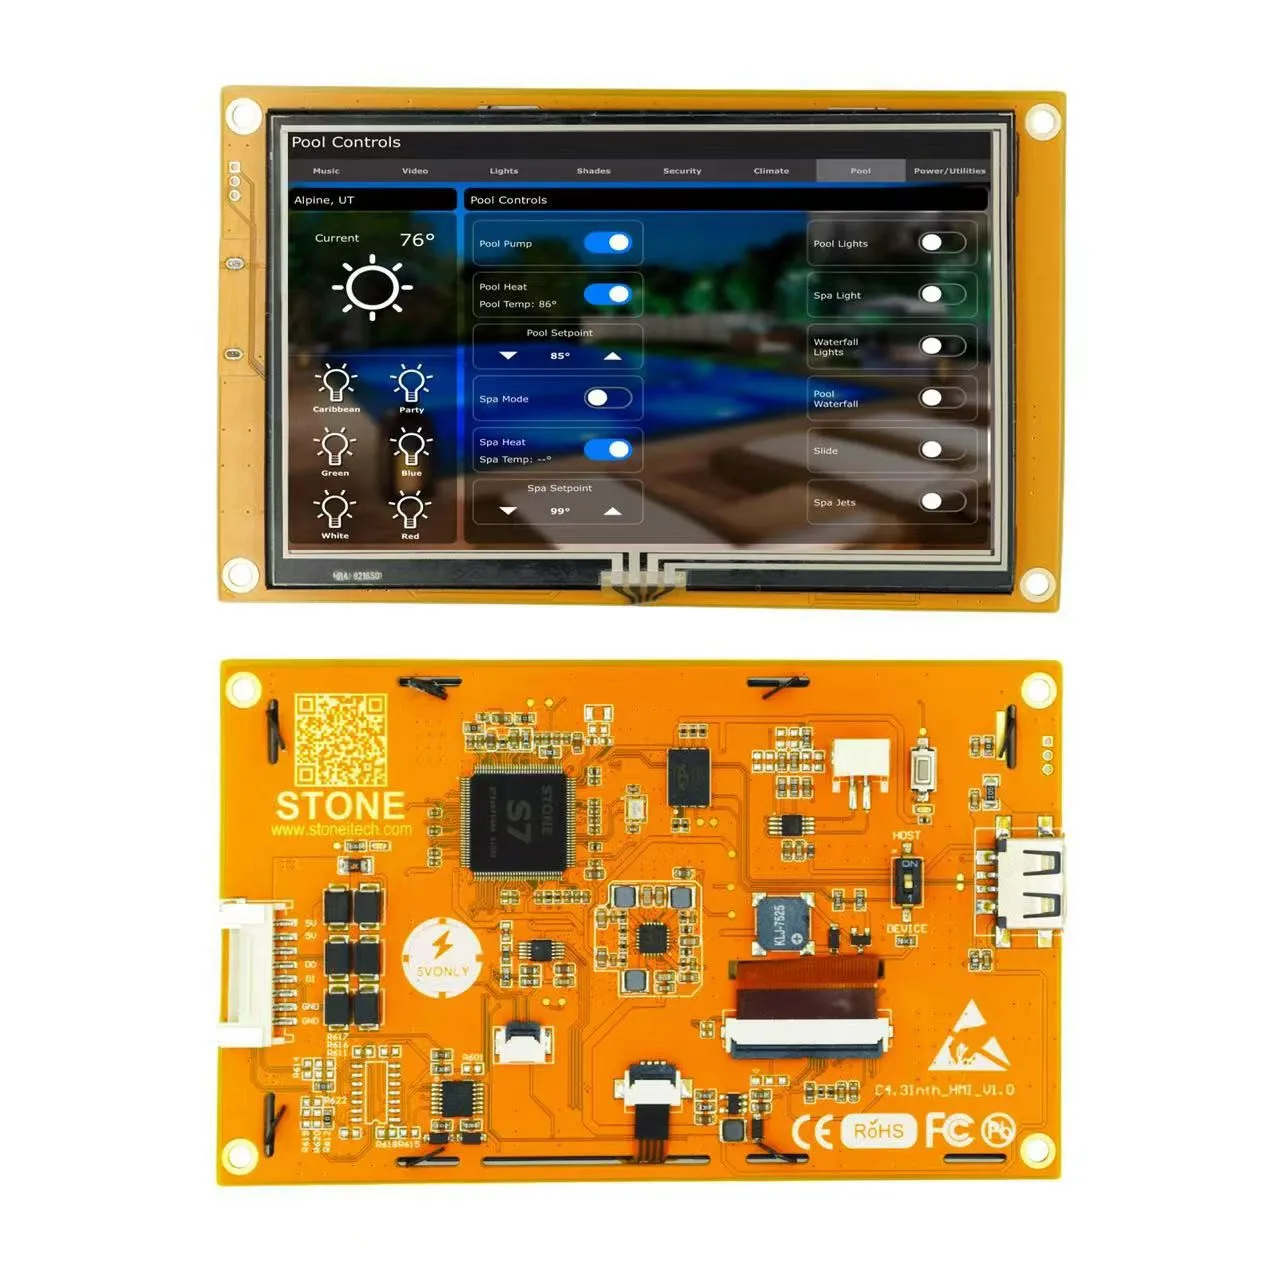 SCBRHMI 4.3 Inch LCD-TFT HMI Display Module Intelligent Series RGB 65K Color Resistive Touch Panel without Enclosure